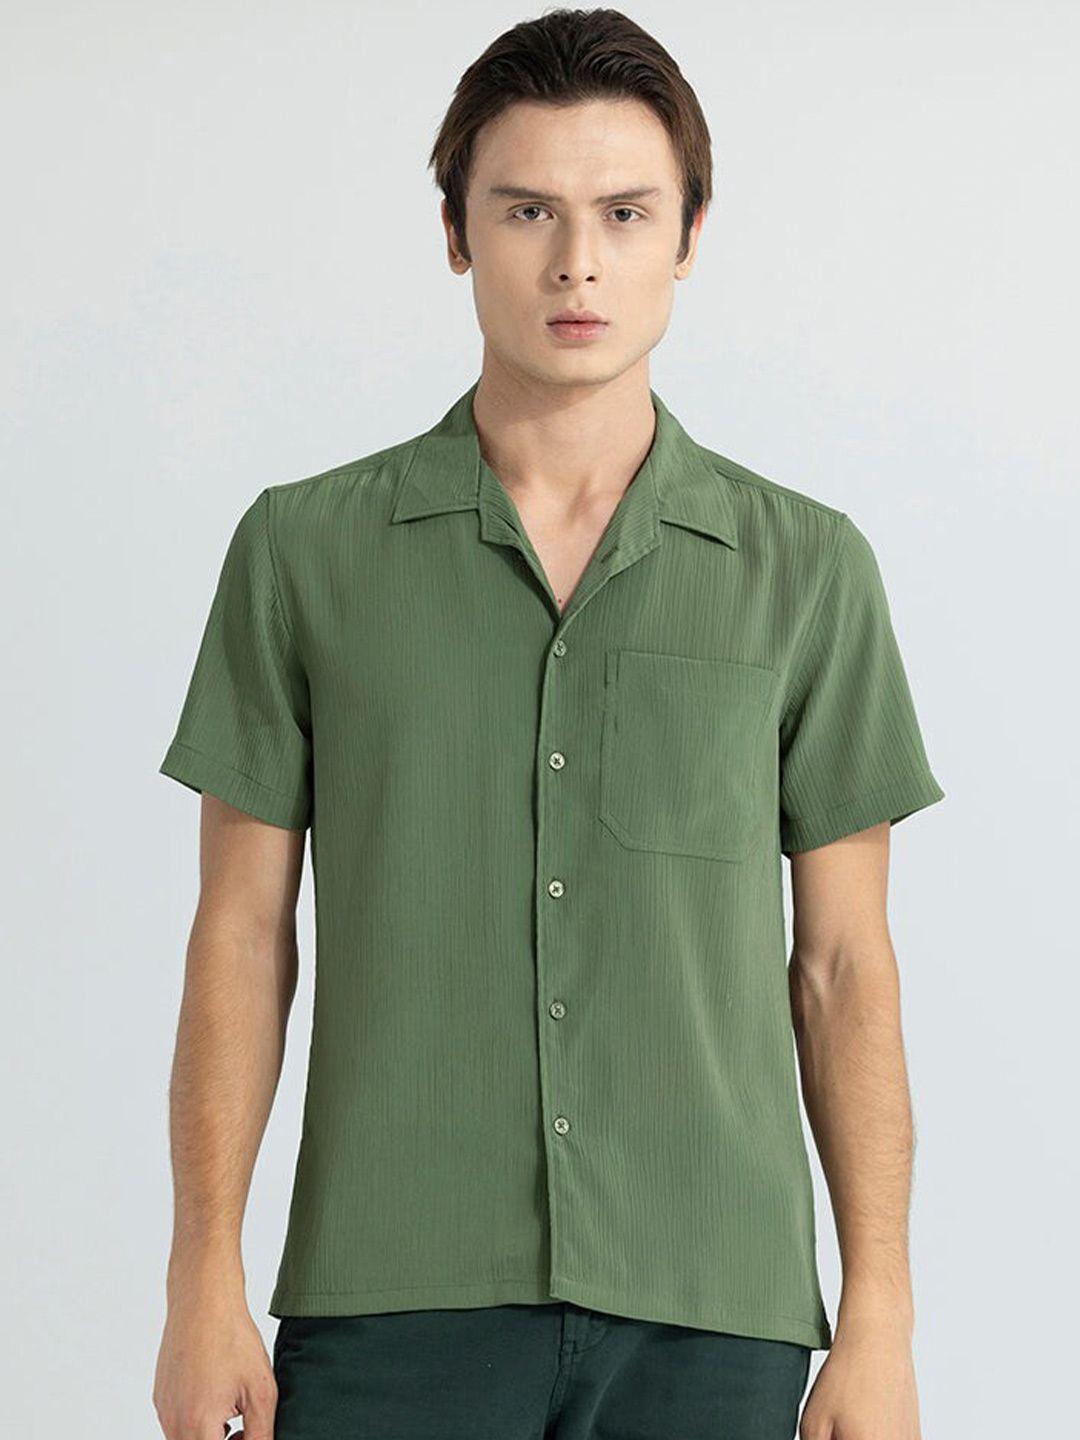 snitch-men-green-classic-slim-fit-opaque-printed-casual-shirt